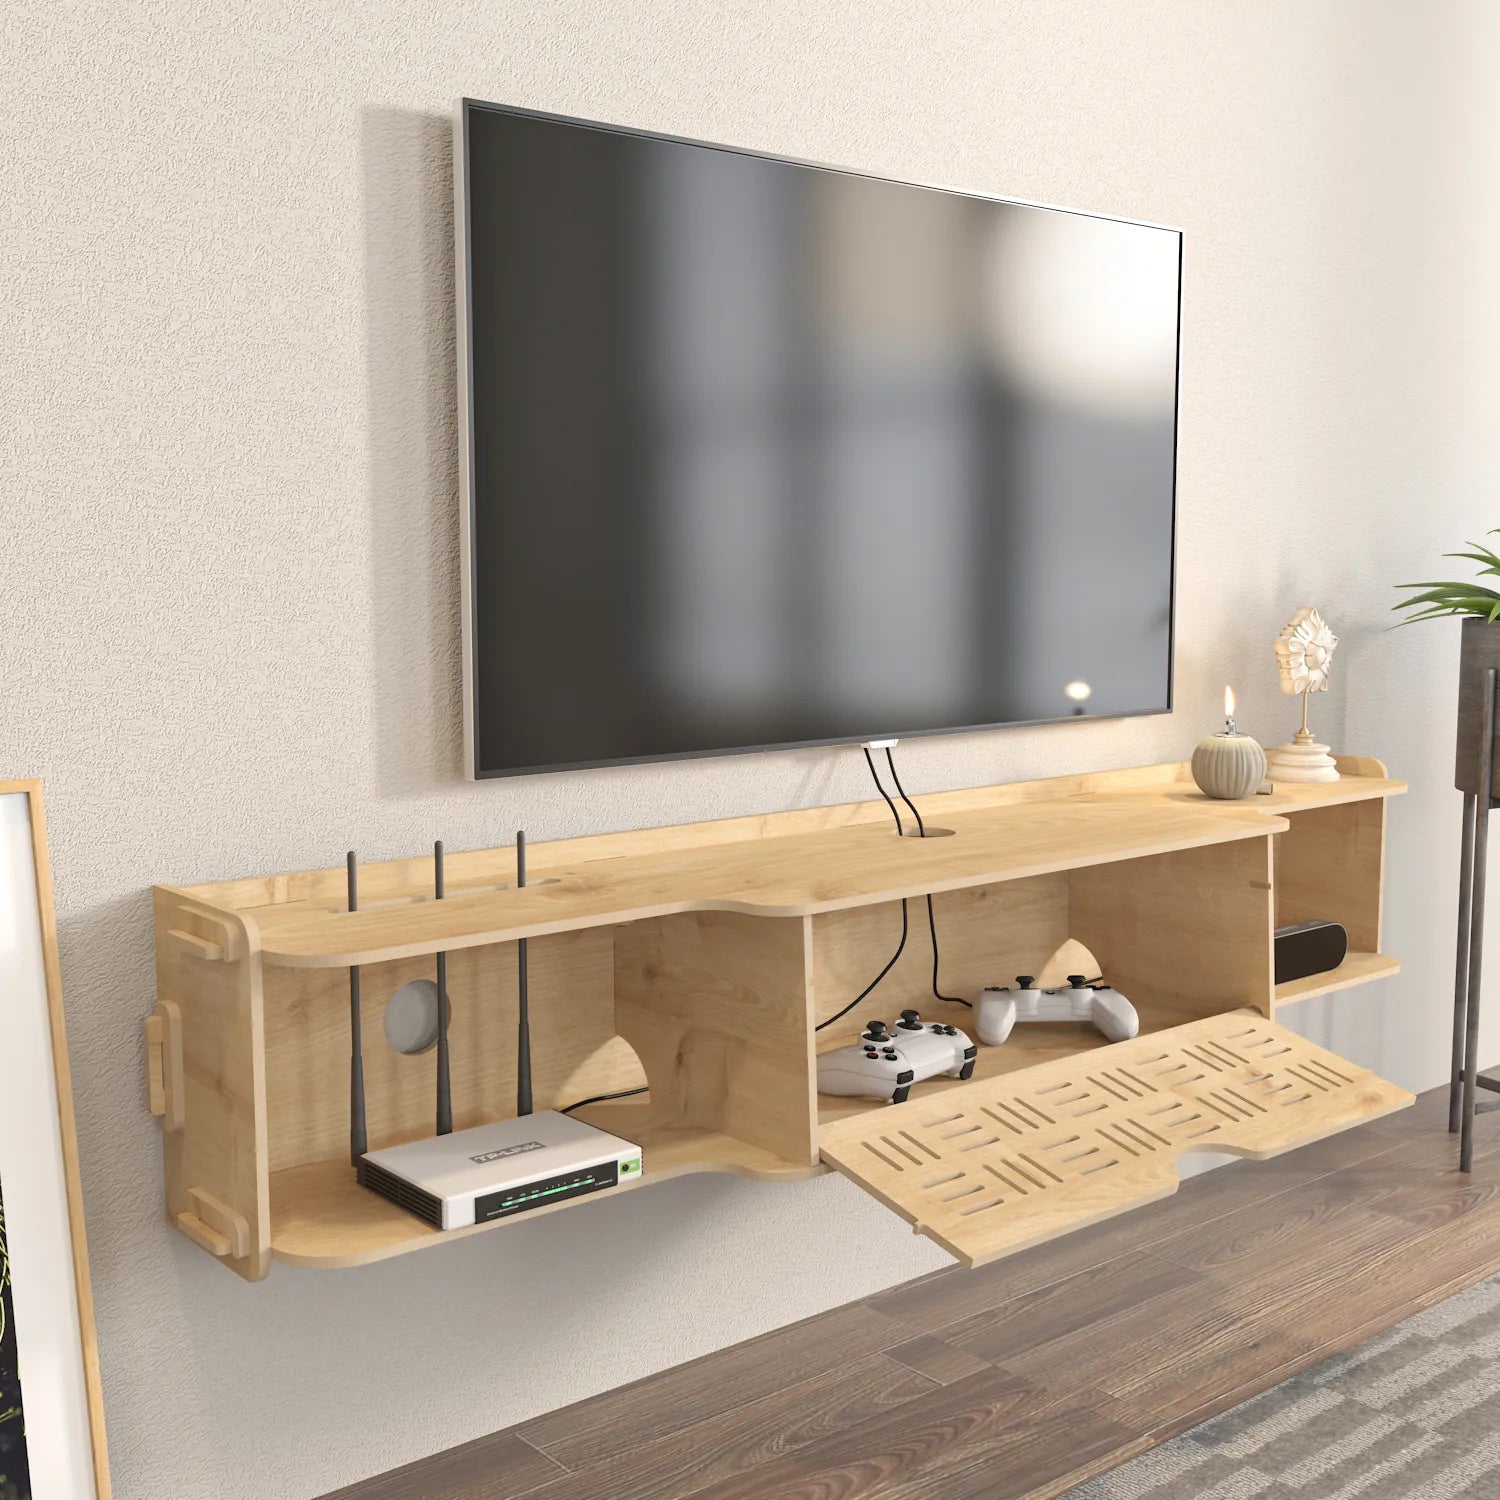 Pare 54" Wide Floating TV Stand and Media Console | MDF | Screwless Design